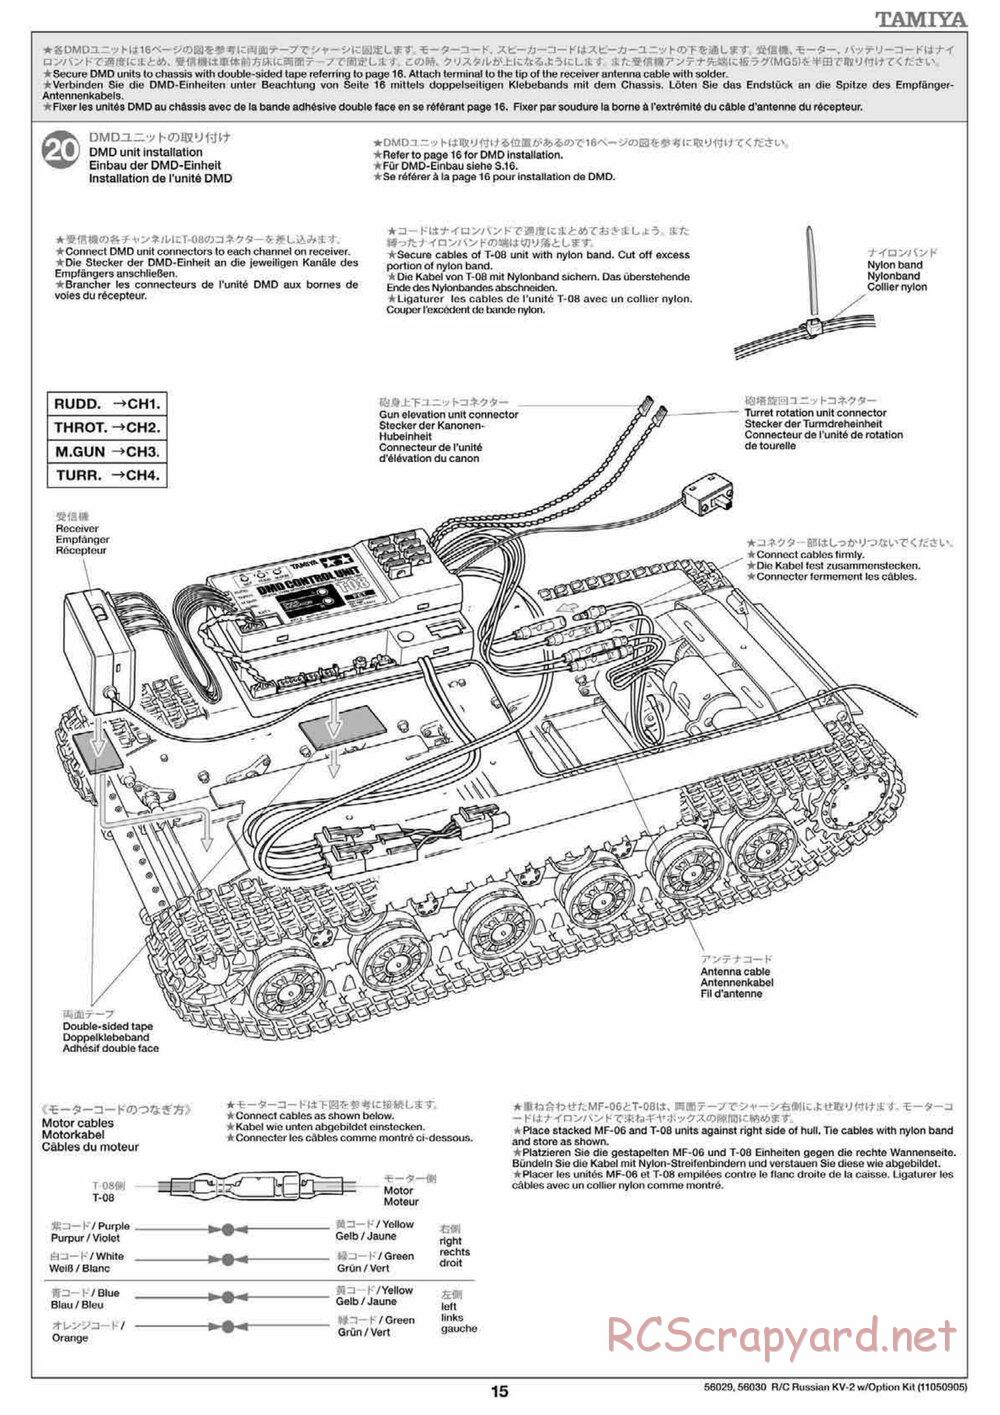 Tamiya - Russian Heavy Tank KV-2 Gigant - 1/16 Scale Chassis - Manual - Page 15